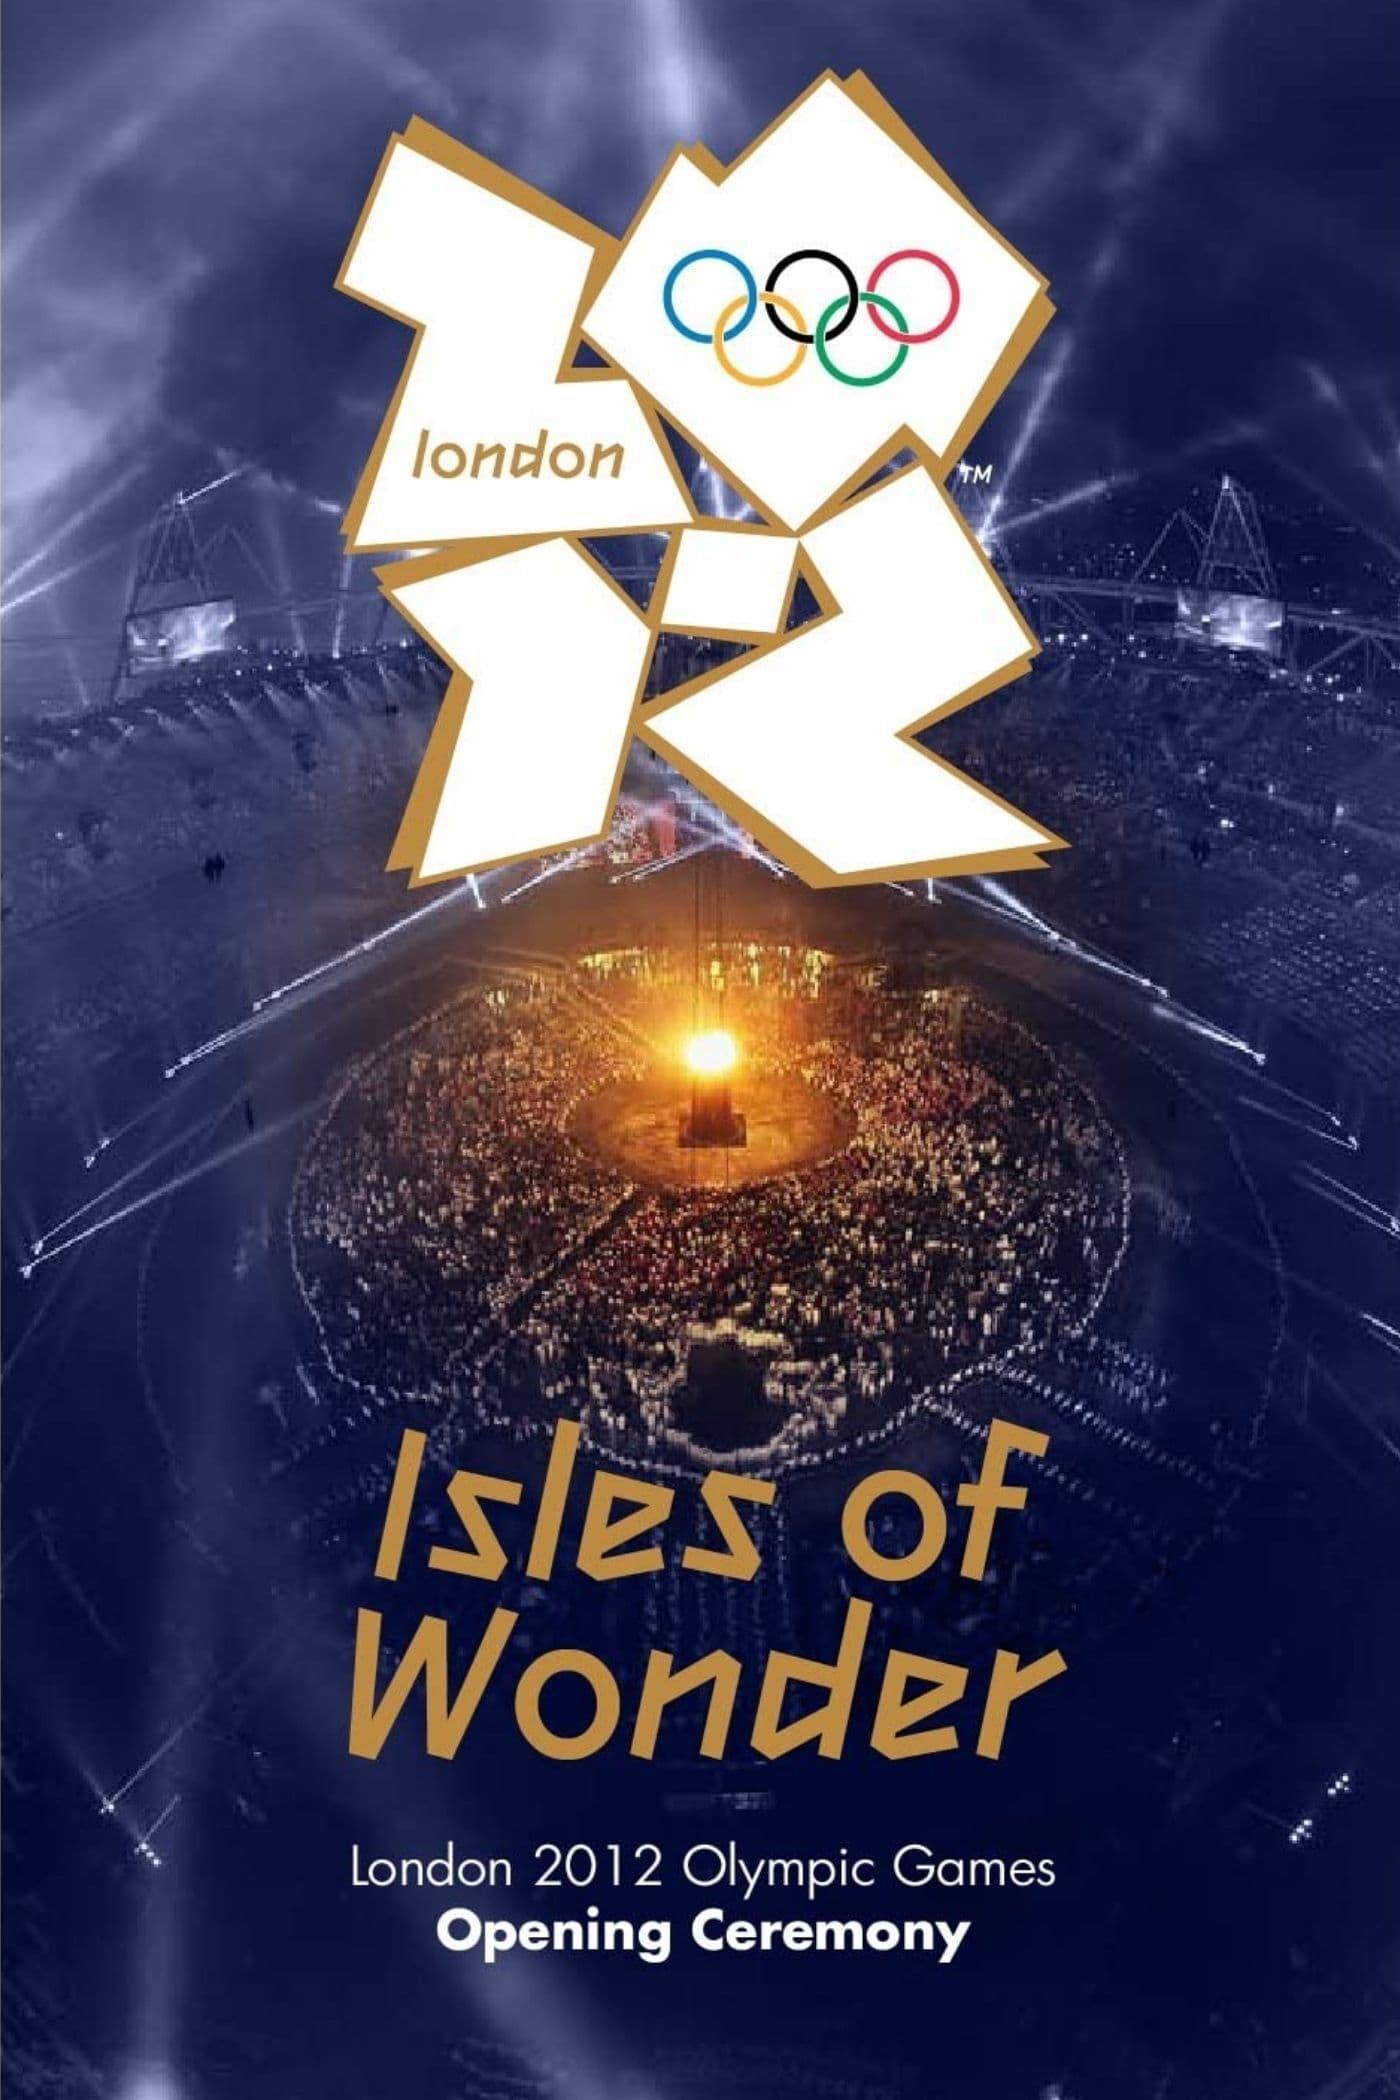 London 2012 Olympic Opening Ceremony: Isles of Wonder poster